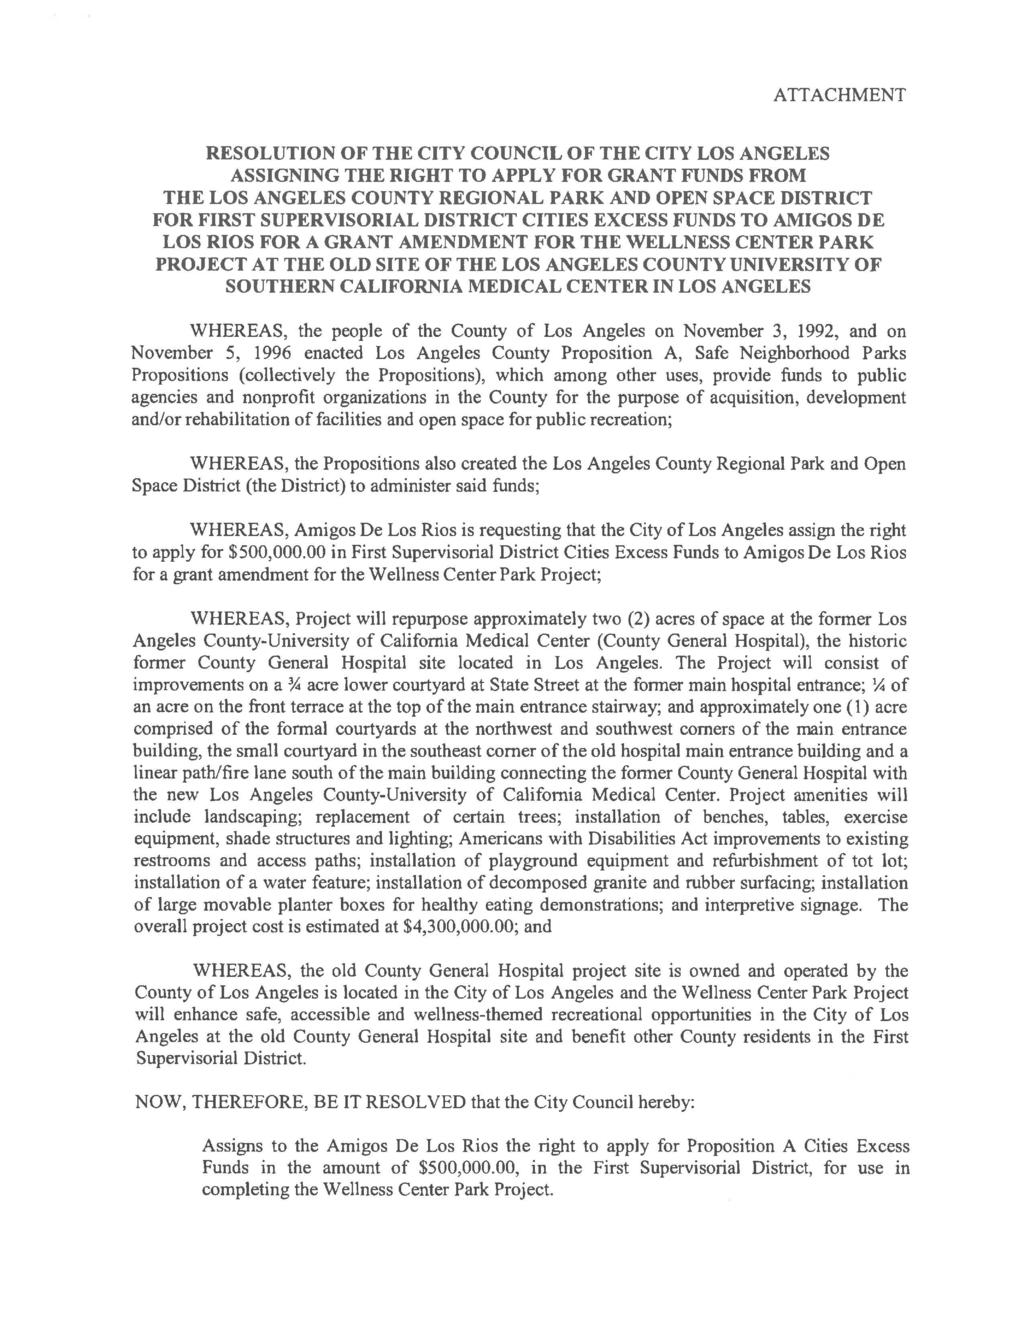 ATTACHMENT RESOLUTION OF THE CITY COUNCIL OF THE CITY LOS ANGELES ASSIGNING THE RIGHT TO APPLY FOR GRANT FUNDS FROM THE LOS ANGELES COUNTY REGIONAL PARK AND OPEN SPACE DISTRICT FOR FIRST